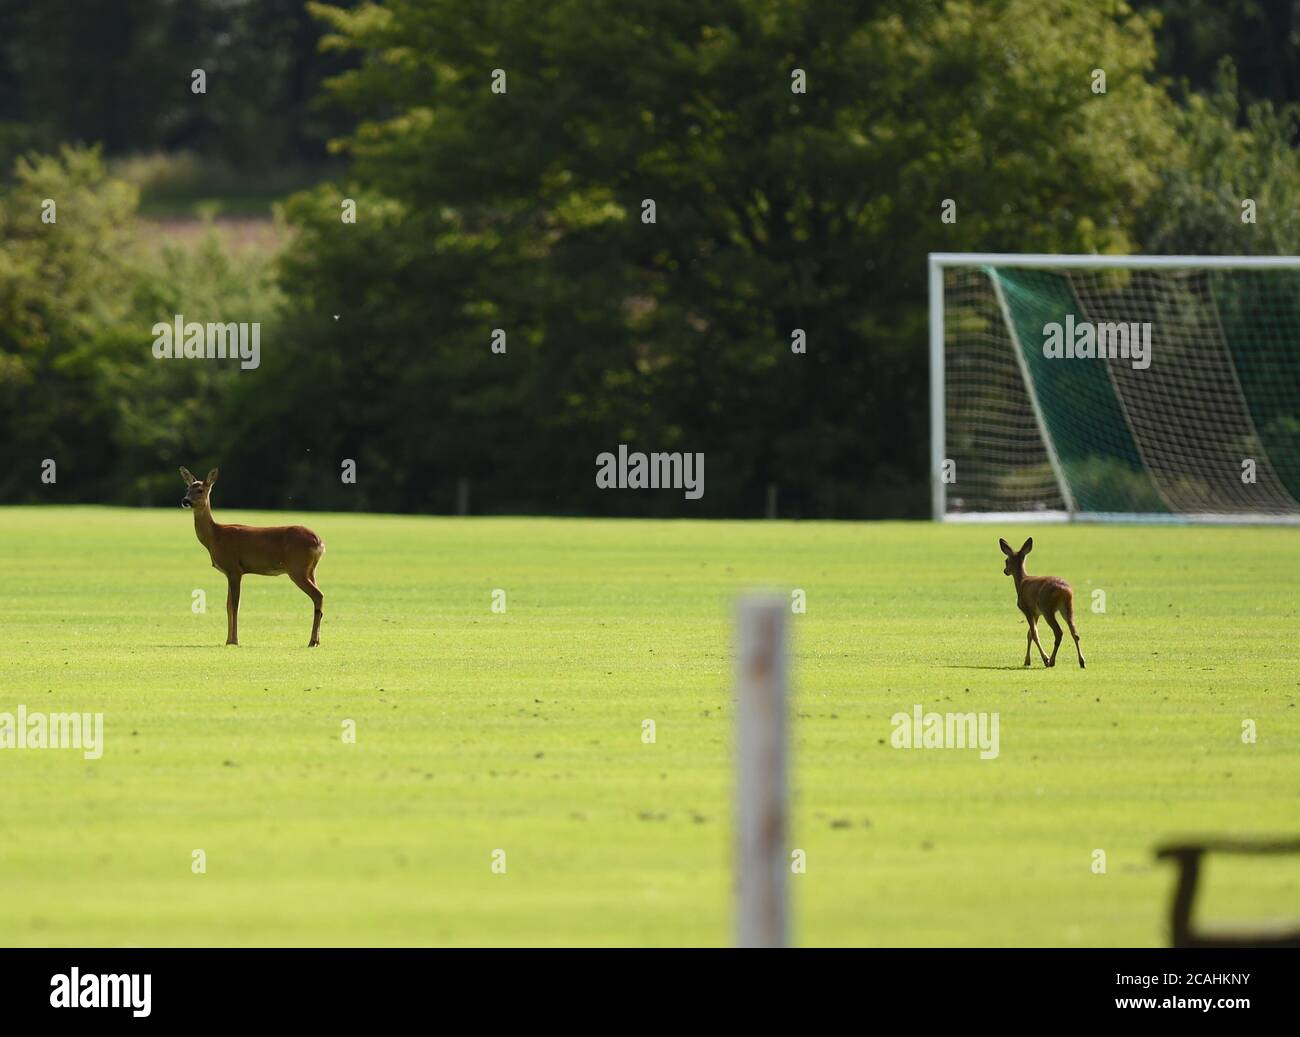 Tranent, Ormiston, East Lothian.Scotland. UK 7th Aug 20. Hibernian Training Session for SPL match vs Livingston. A Deer and her fawn, wander over the training pitch . Credit: eric mccowat/Alamy Live News Stock Photo